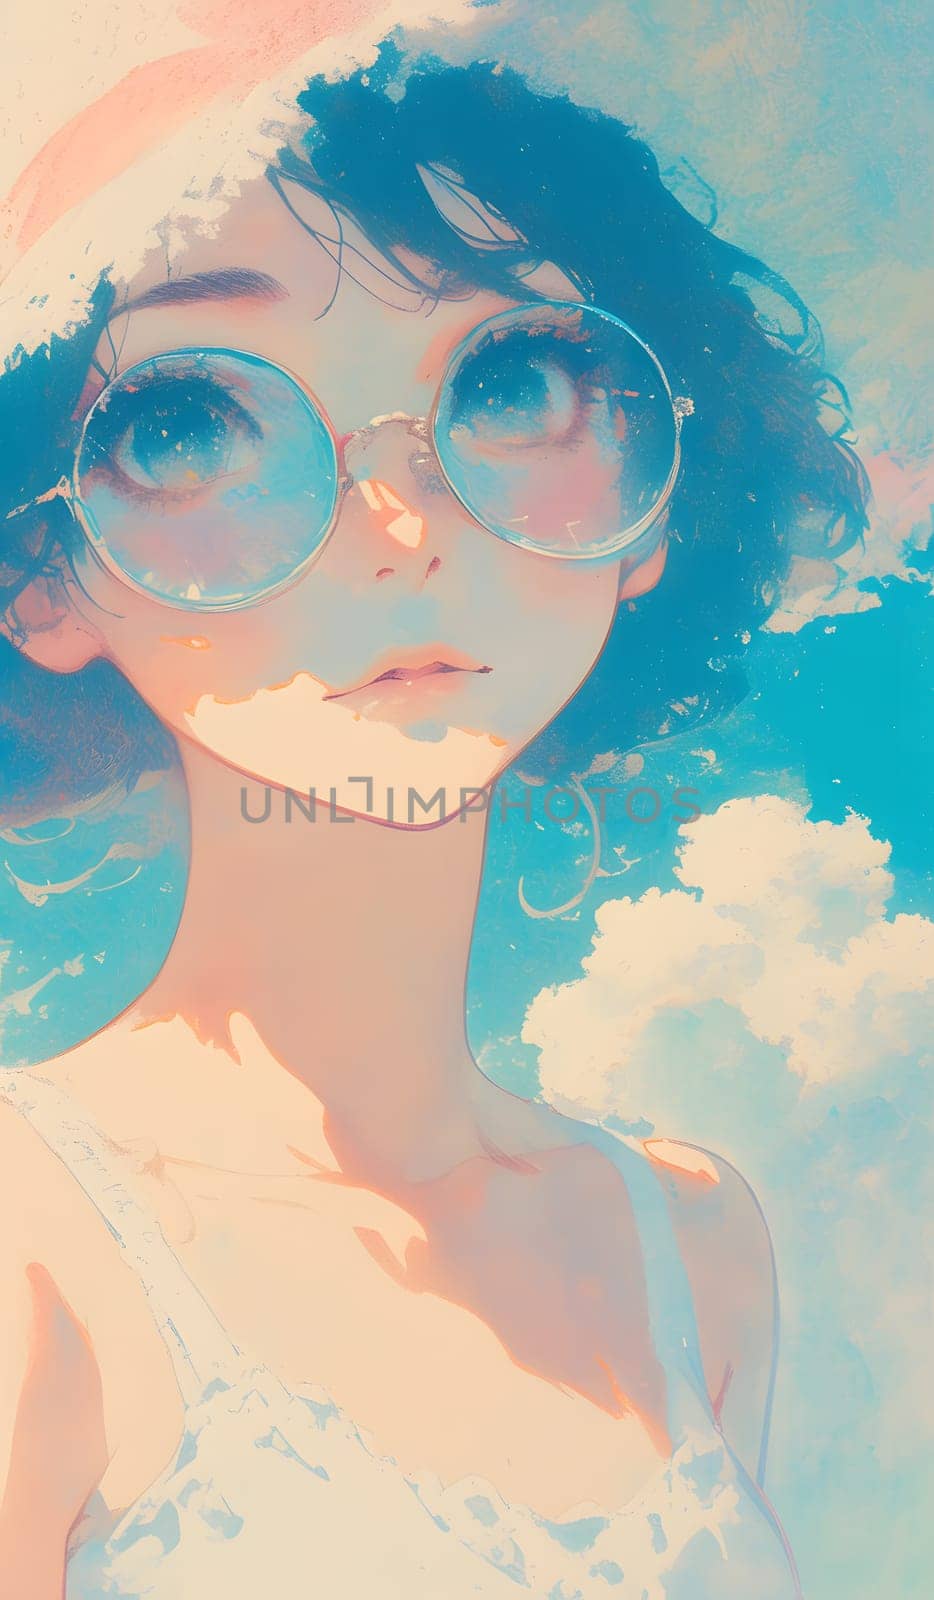 A girl with eyewear and a hat gazes up at the sky, showcasing her electric blue sunglasses. Her nose, lips, and eyelashes are painted beautifully, making her an artful vision care model